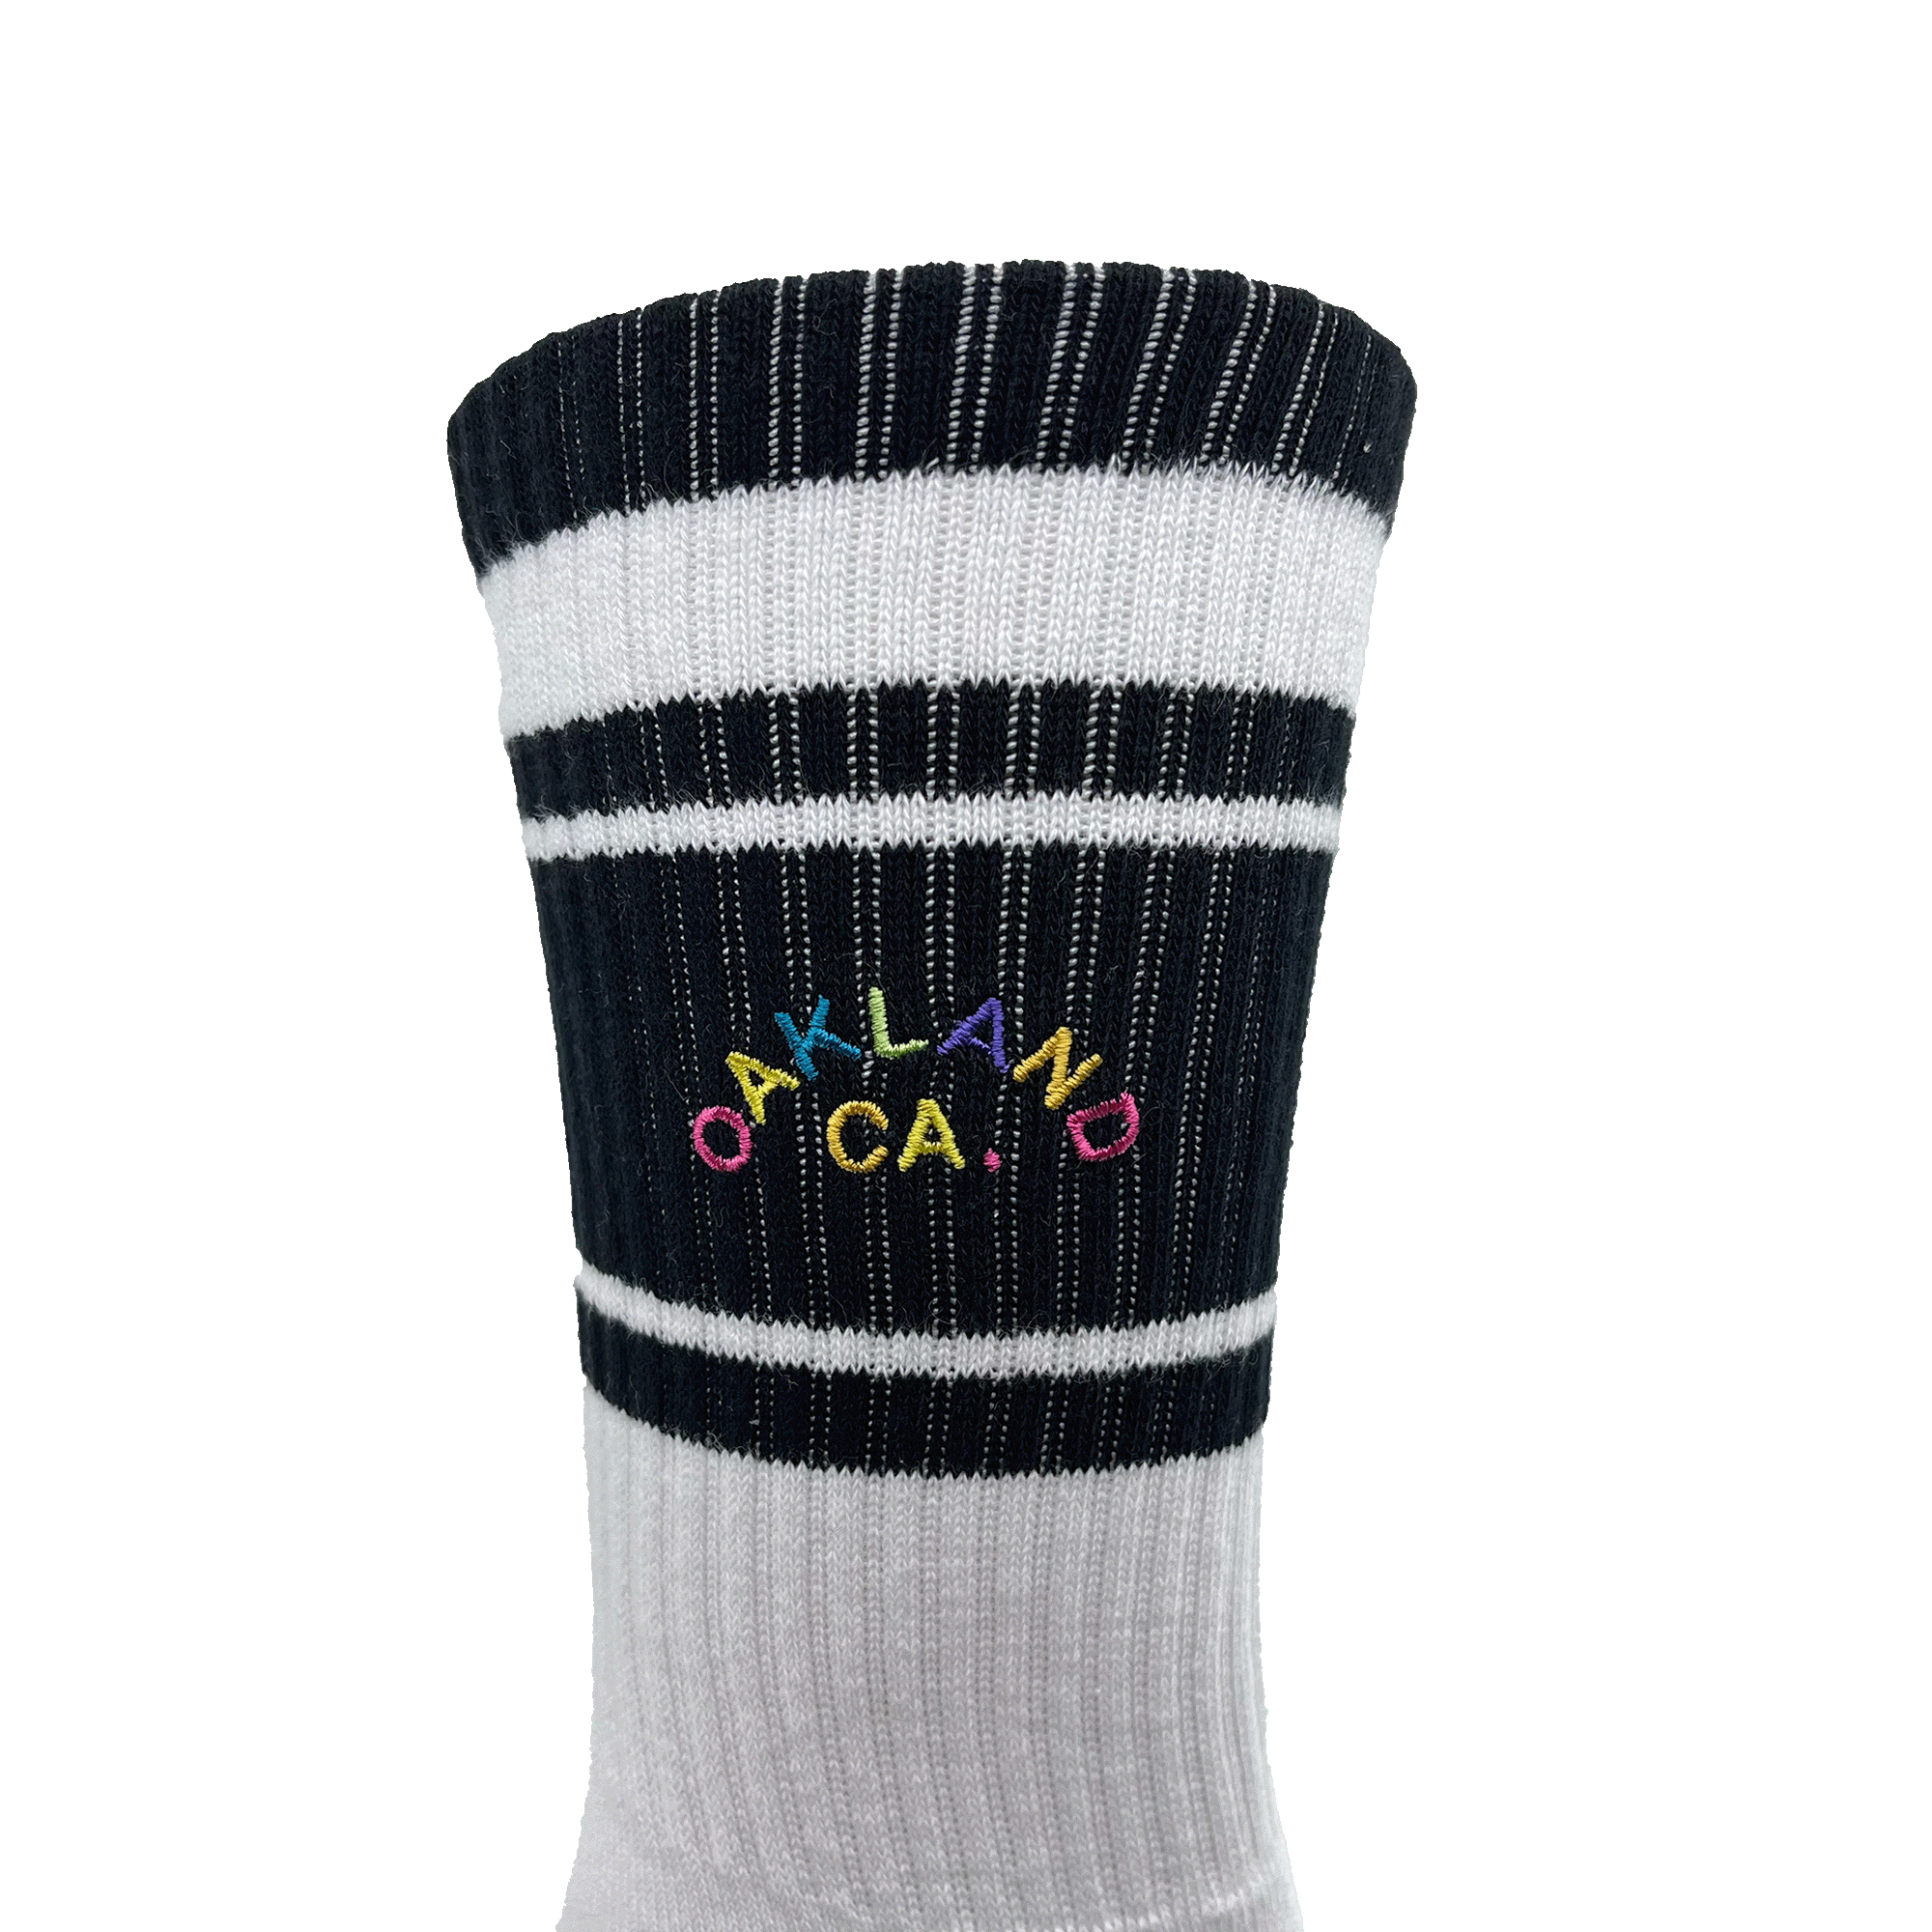 Detailed close-up of full-color OAKLAND CALIFORNIA wordmark on the side calf of a black and white crew sock.